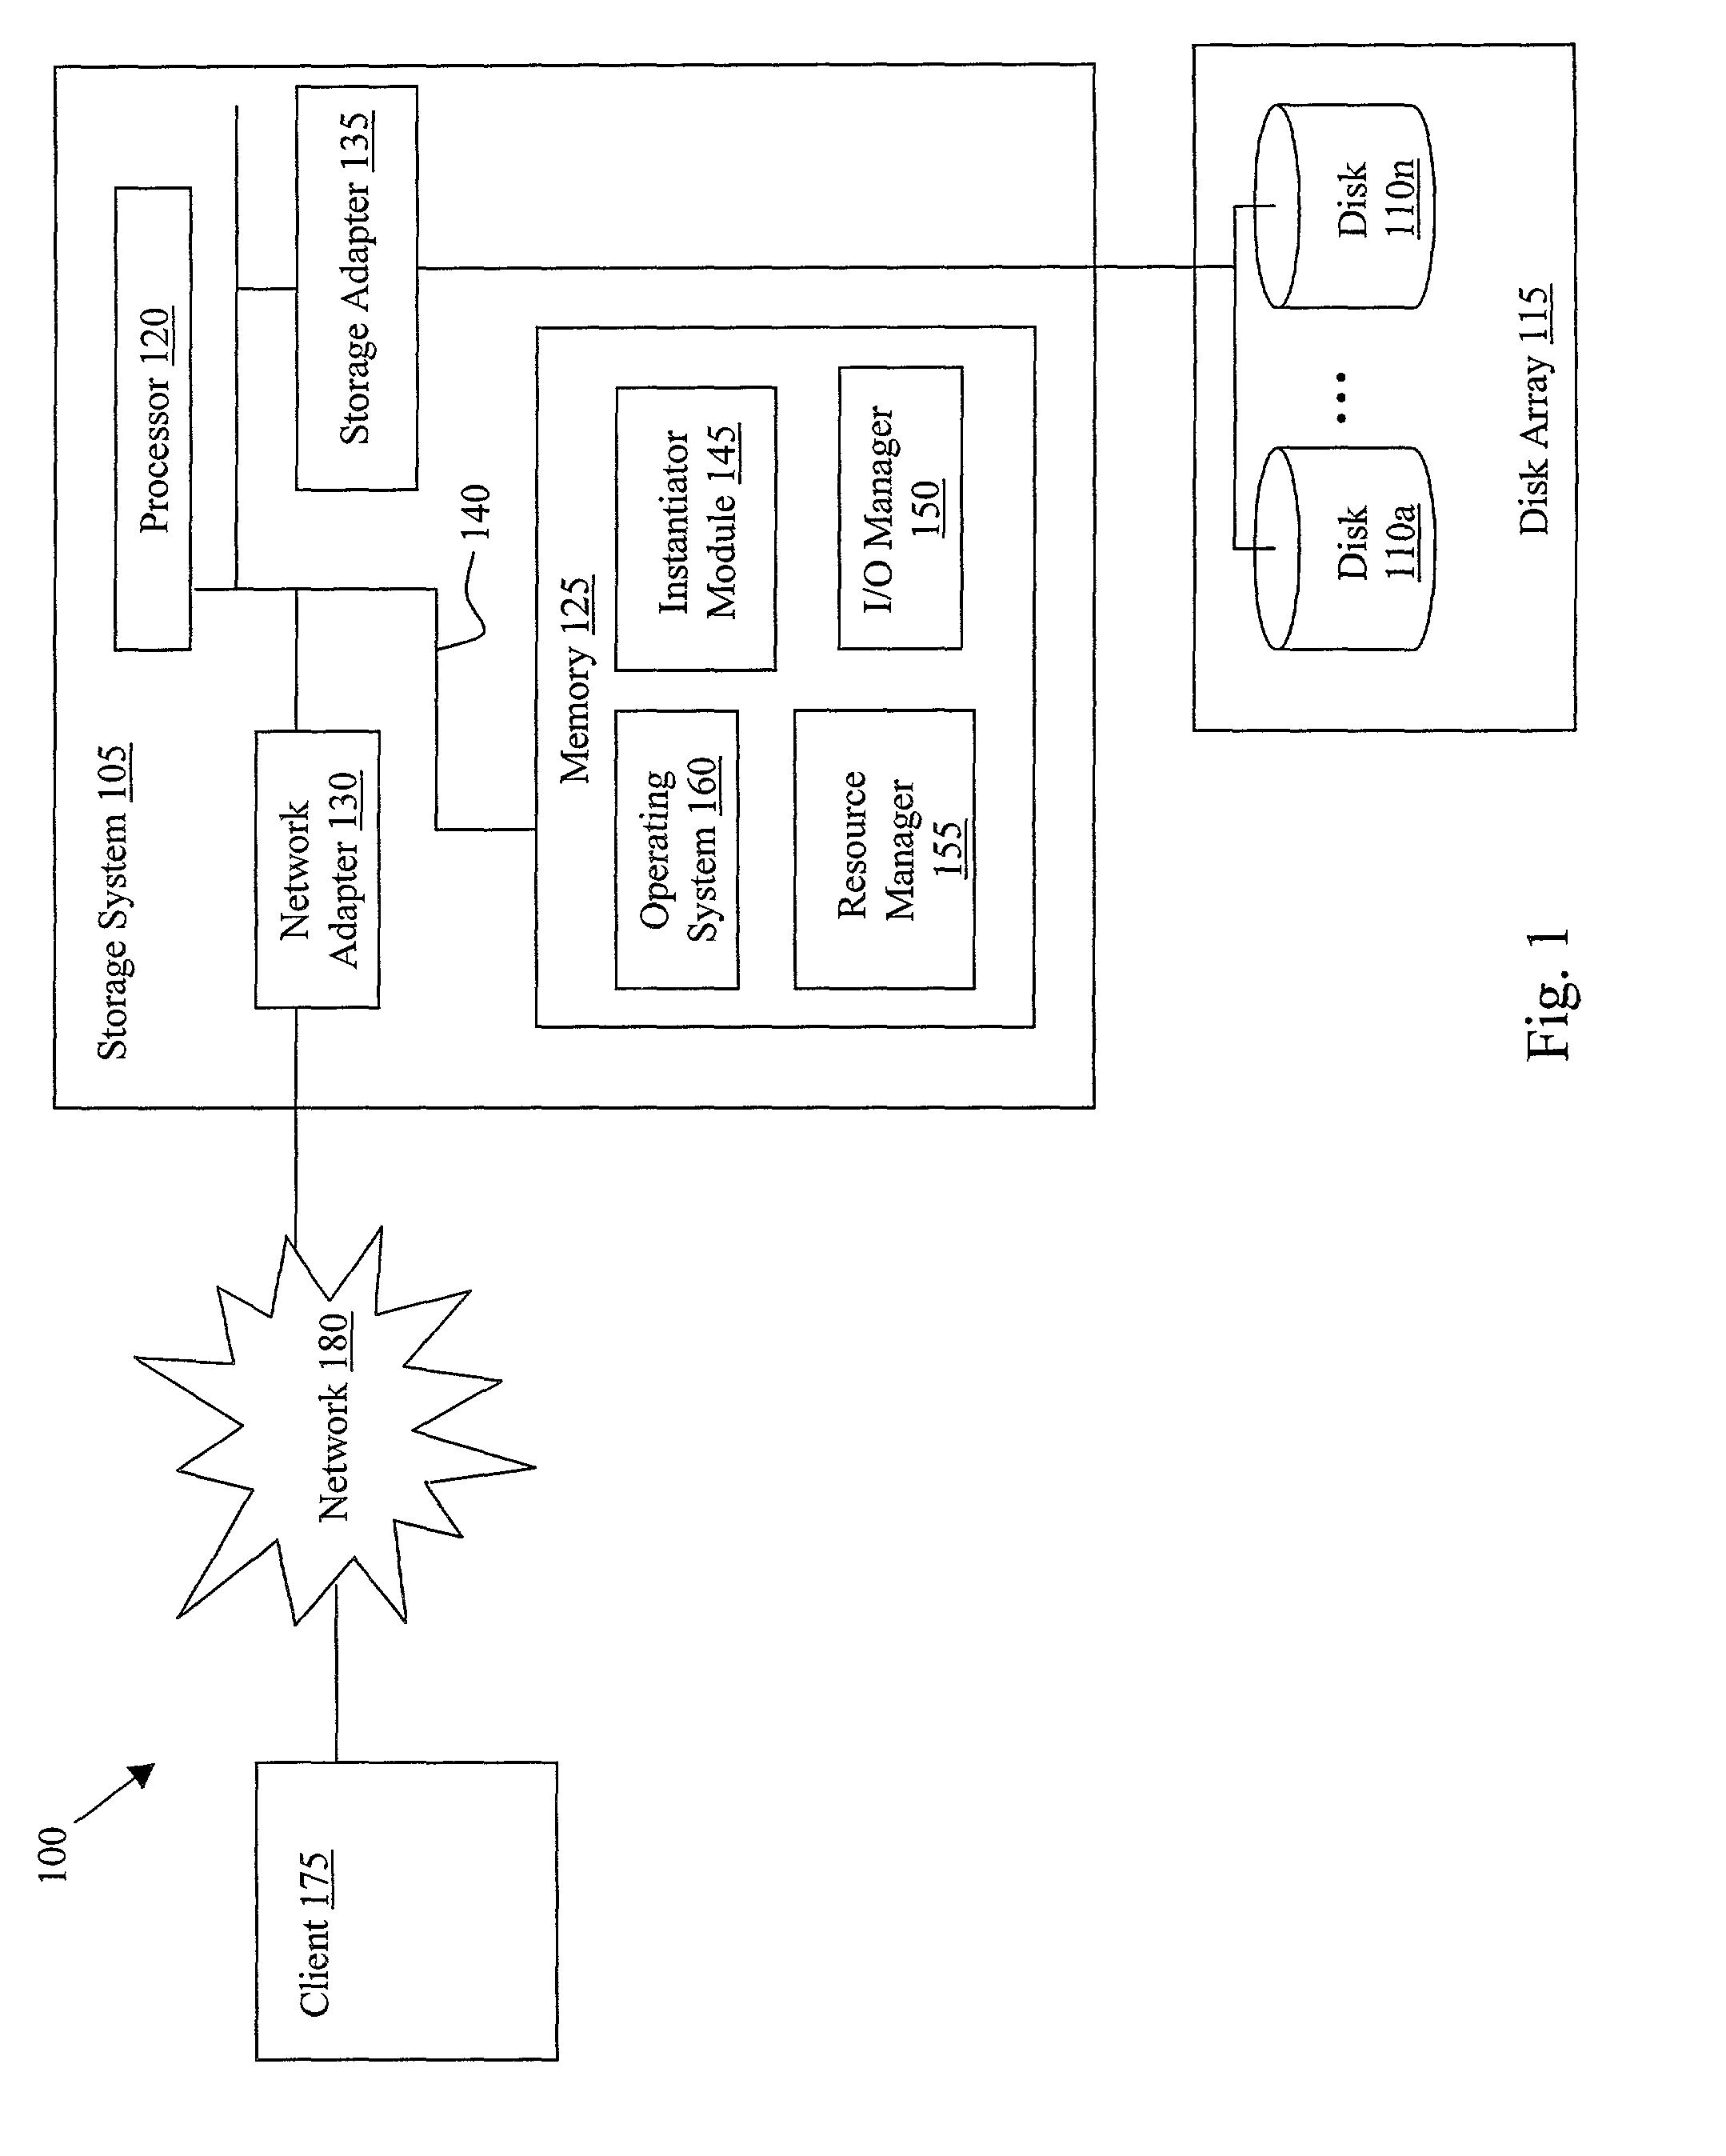 Method and apparatus for decomposing I/O tasks in a raid system